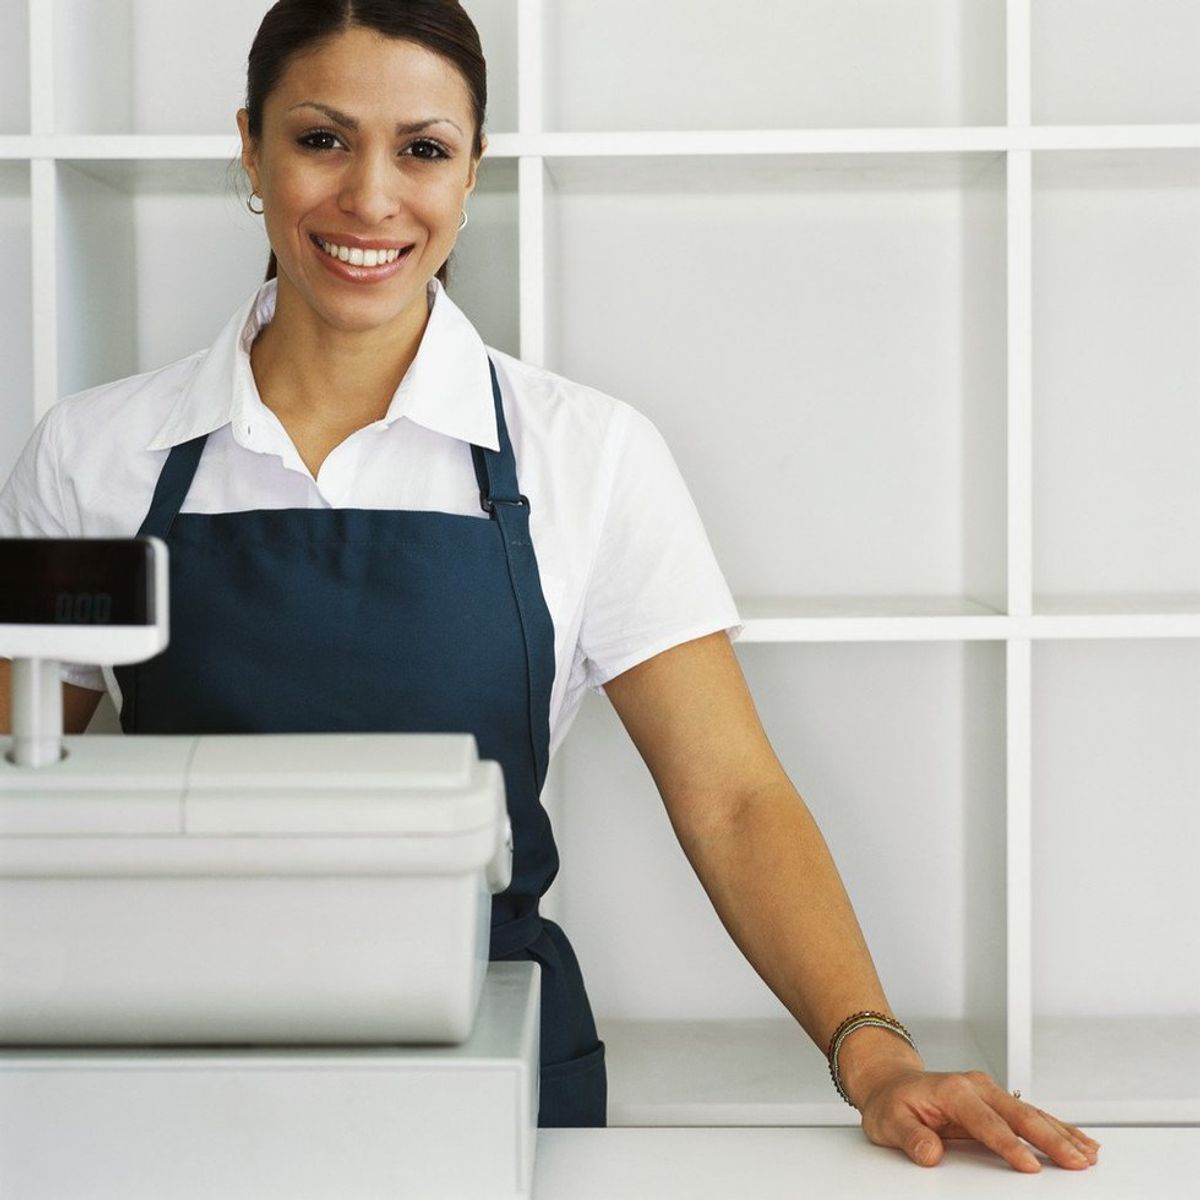 Irritating Instances For Cashiers